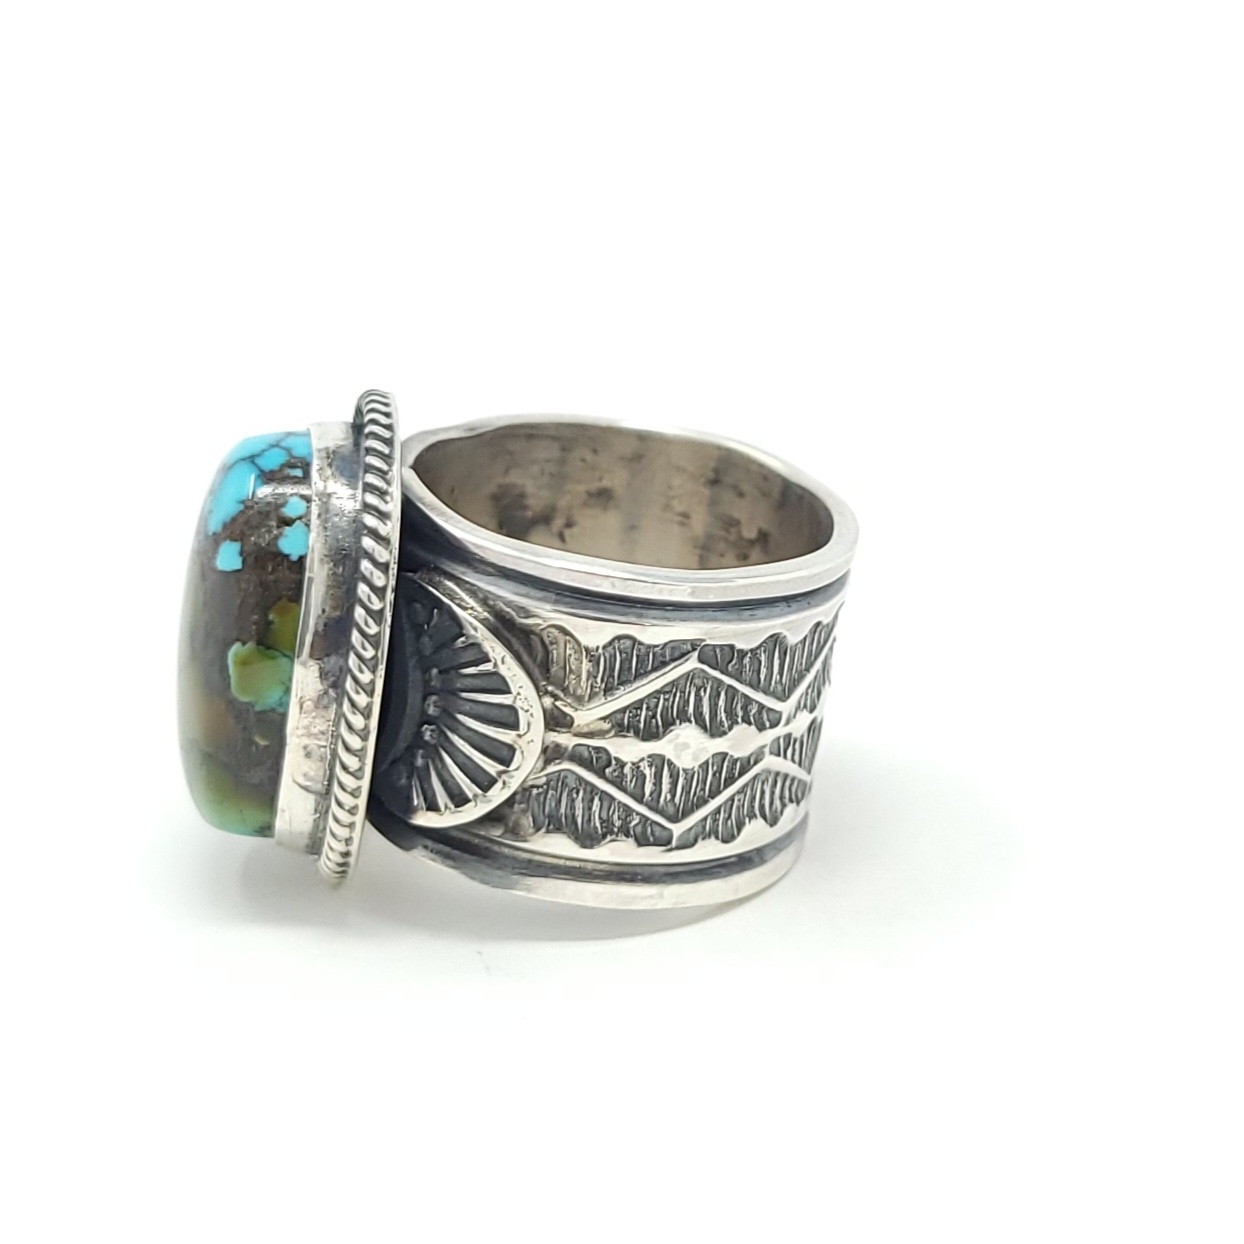 Sunshine Reeves Navajo Sterling Silver Ring Rare Gem Cloud Mountain  Turquoise